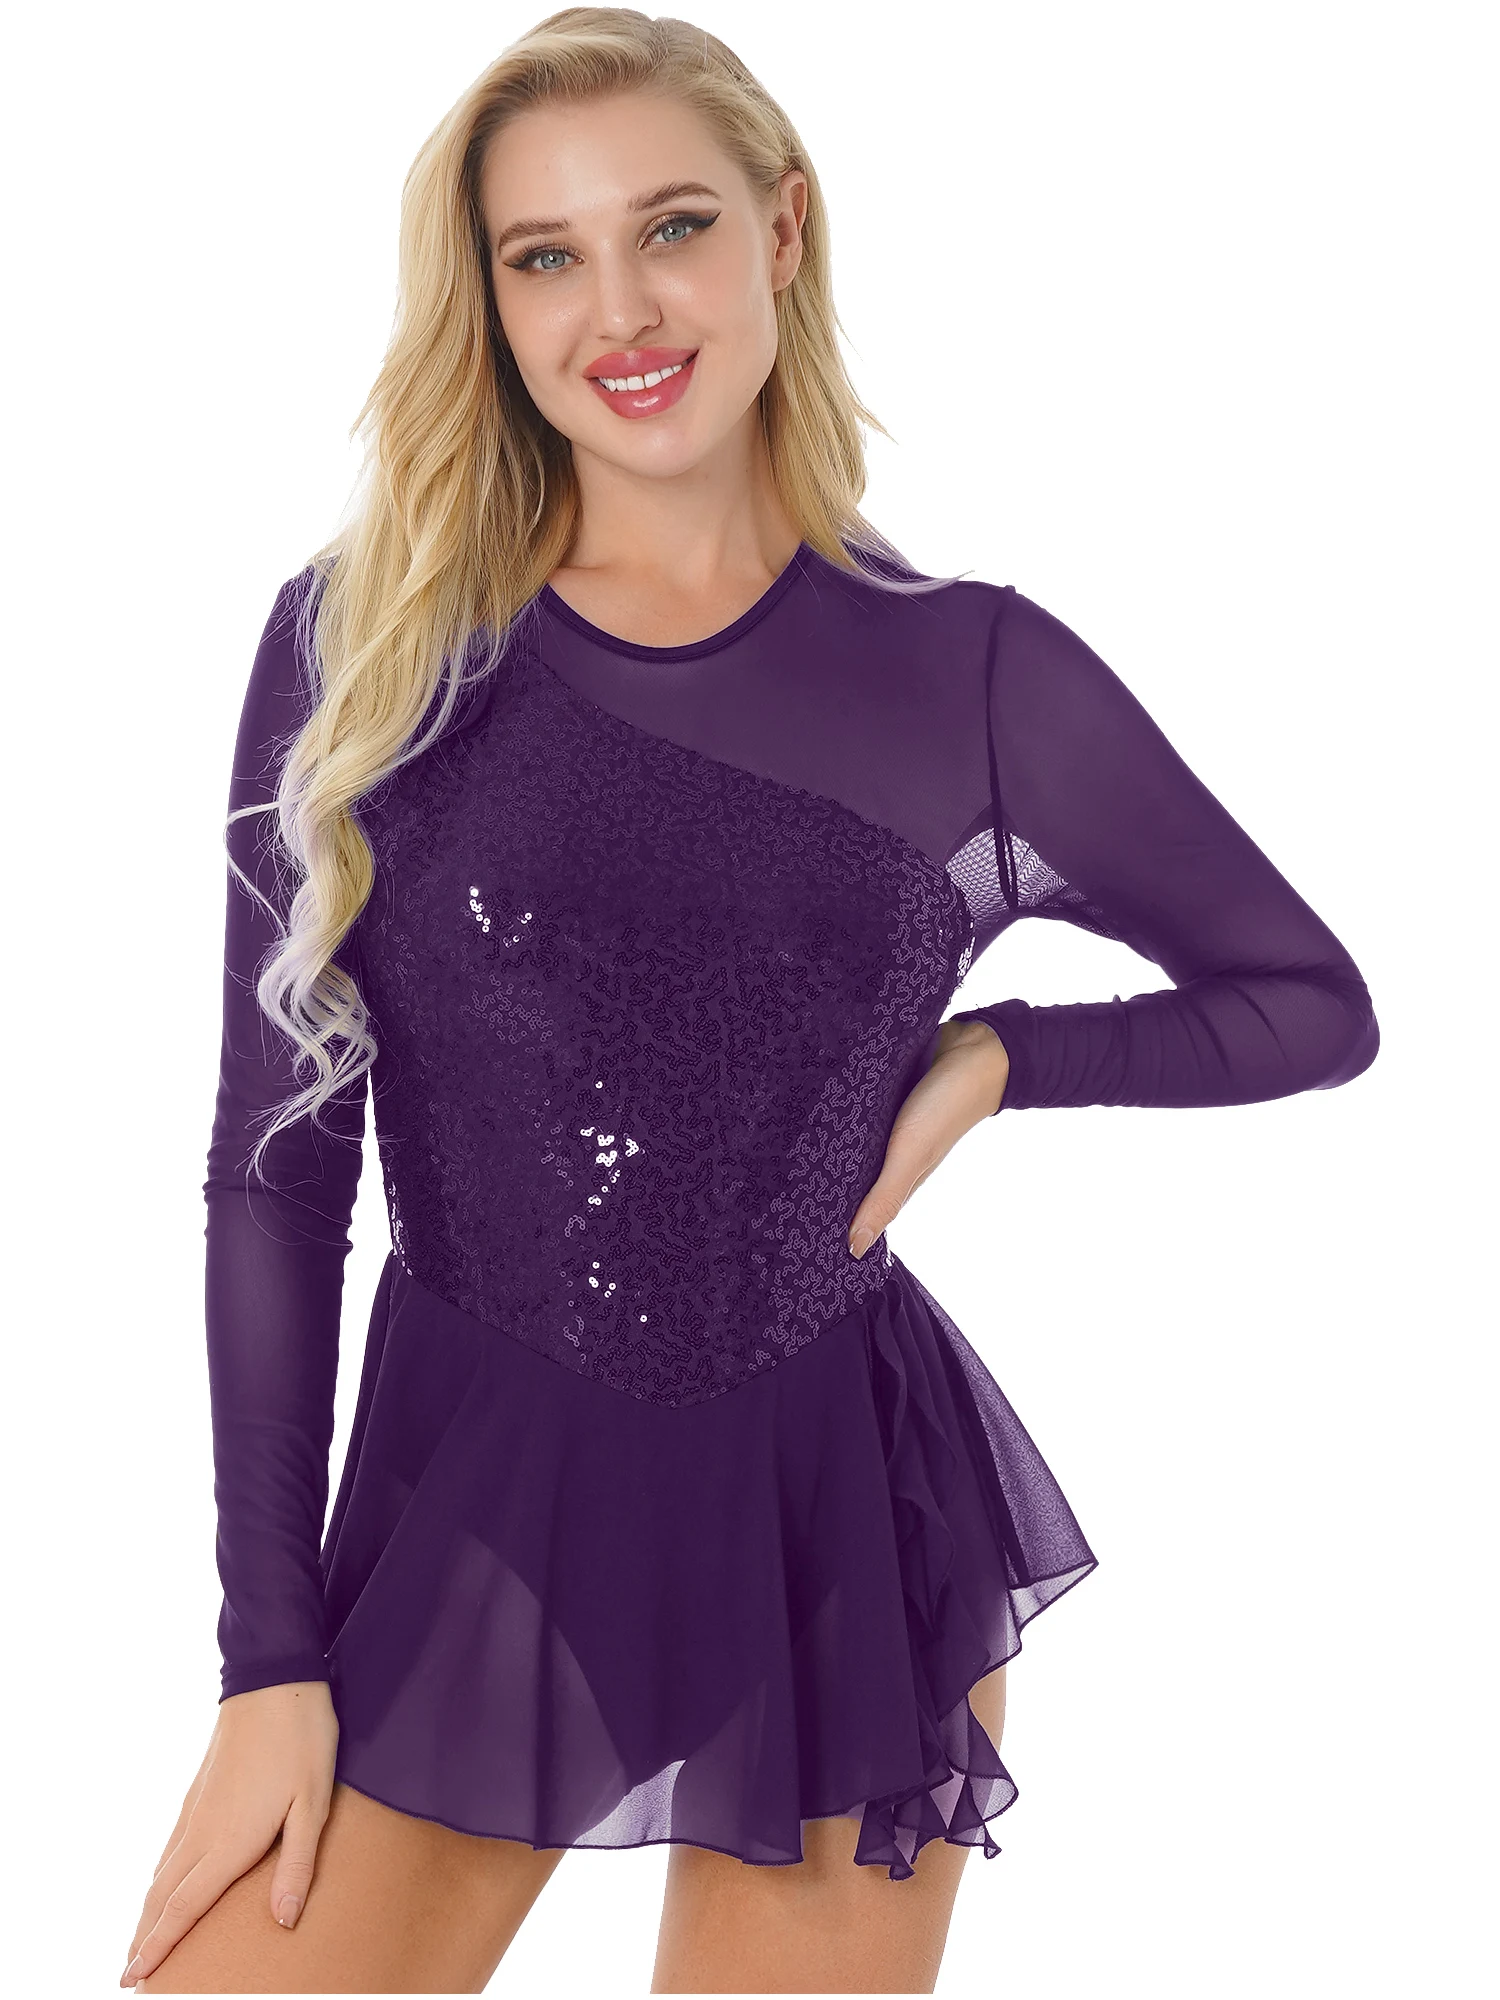 

Glittery Sequins Figure Skating Dance Dress Women Long Sleeves Sheer Mesh Patchwork Dress Figure Skating Competition Costumes